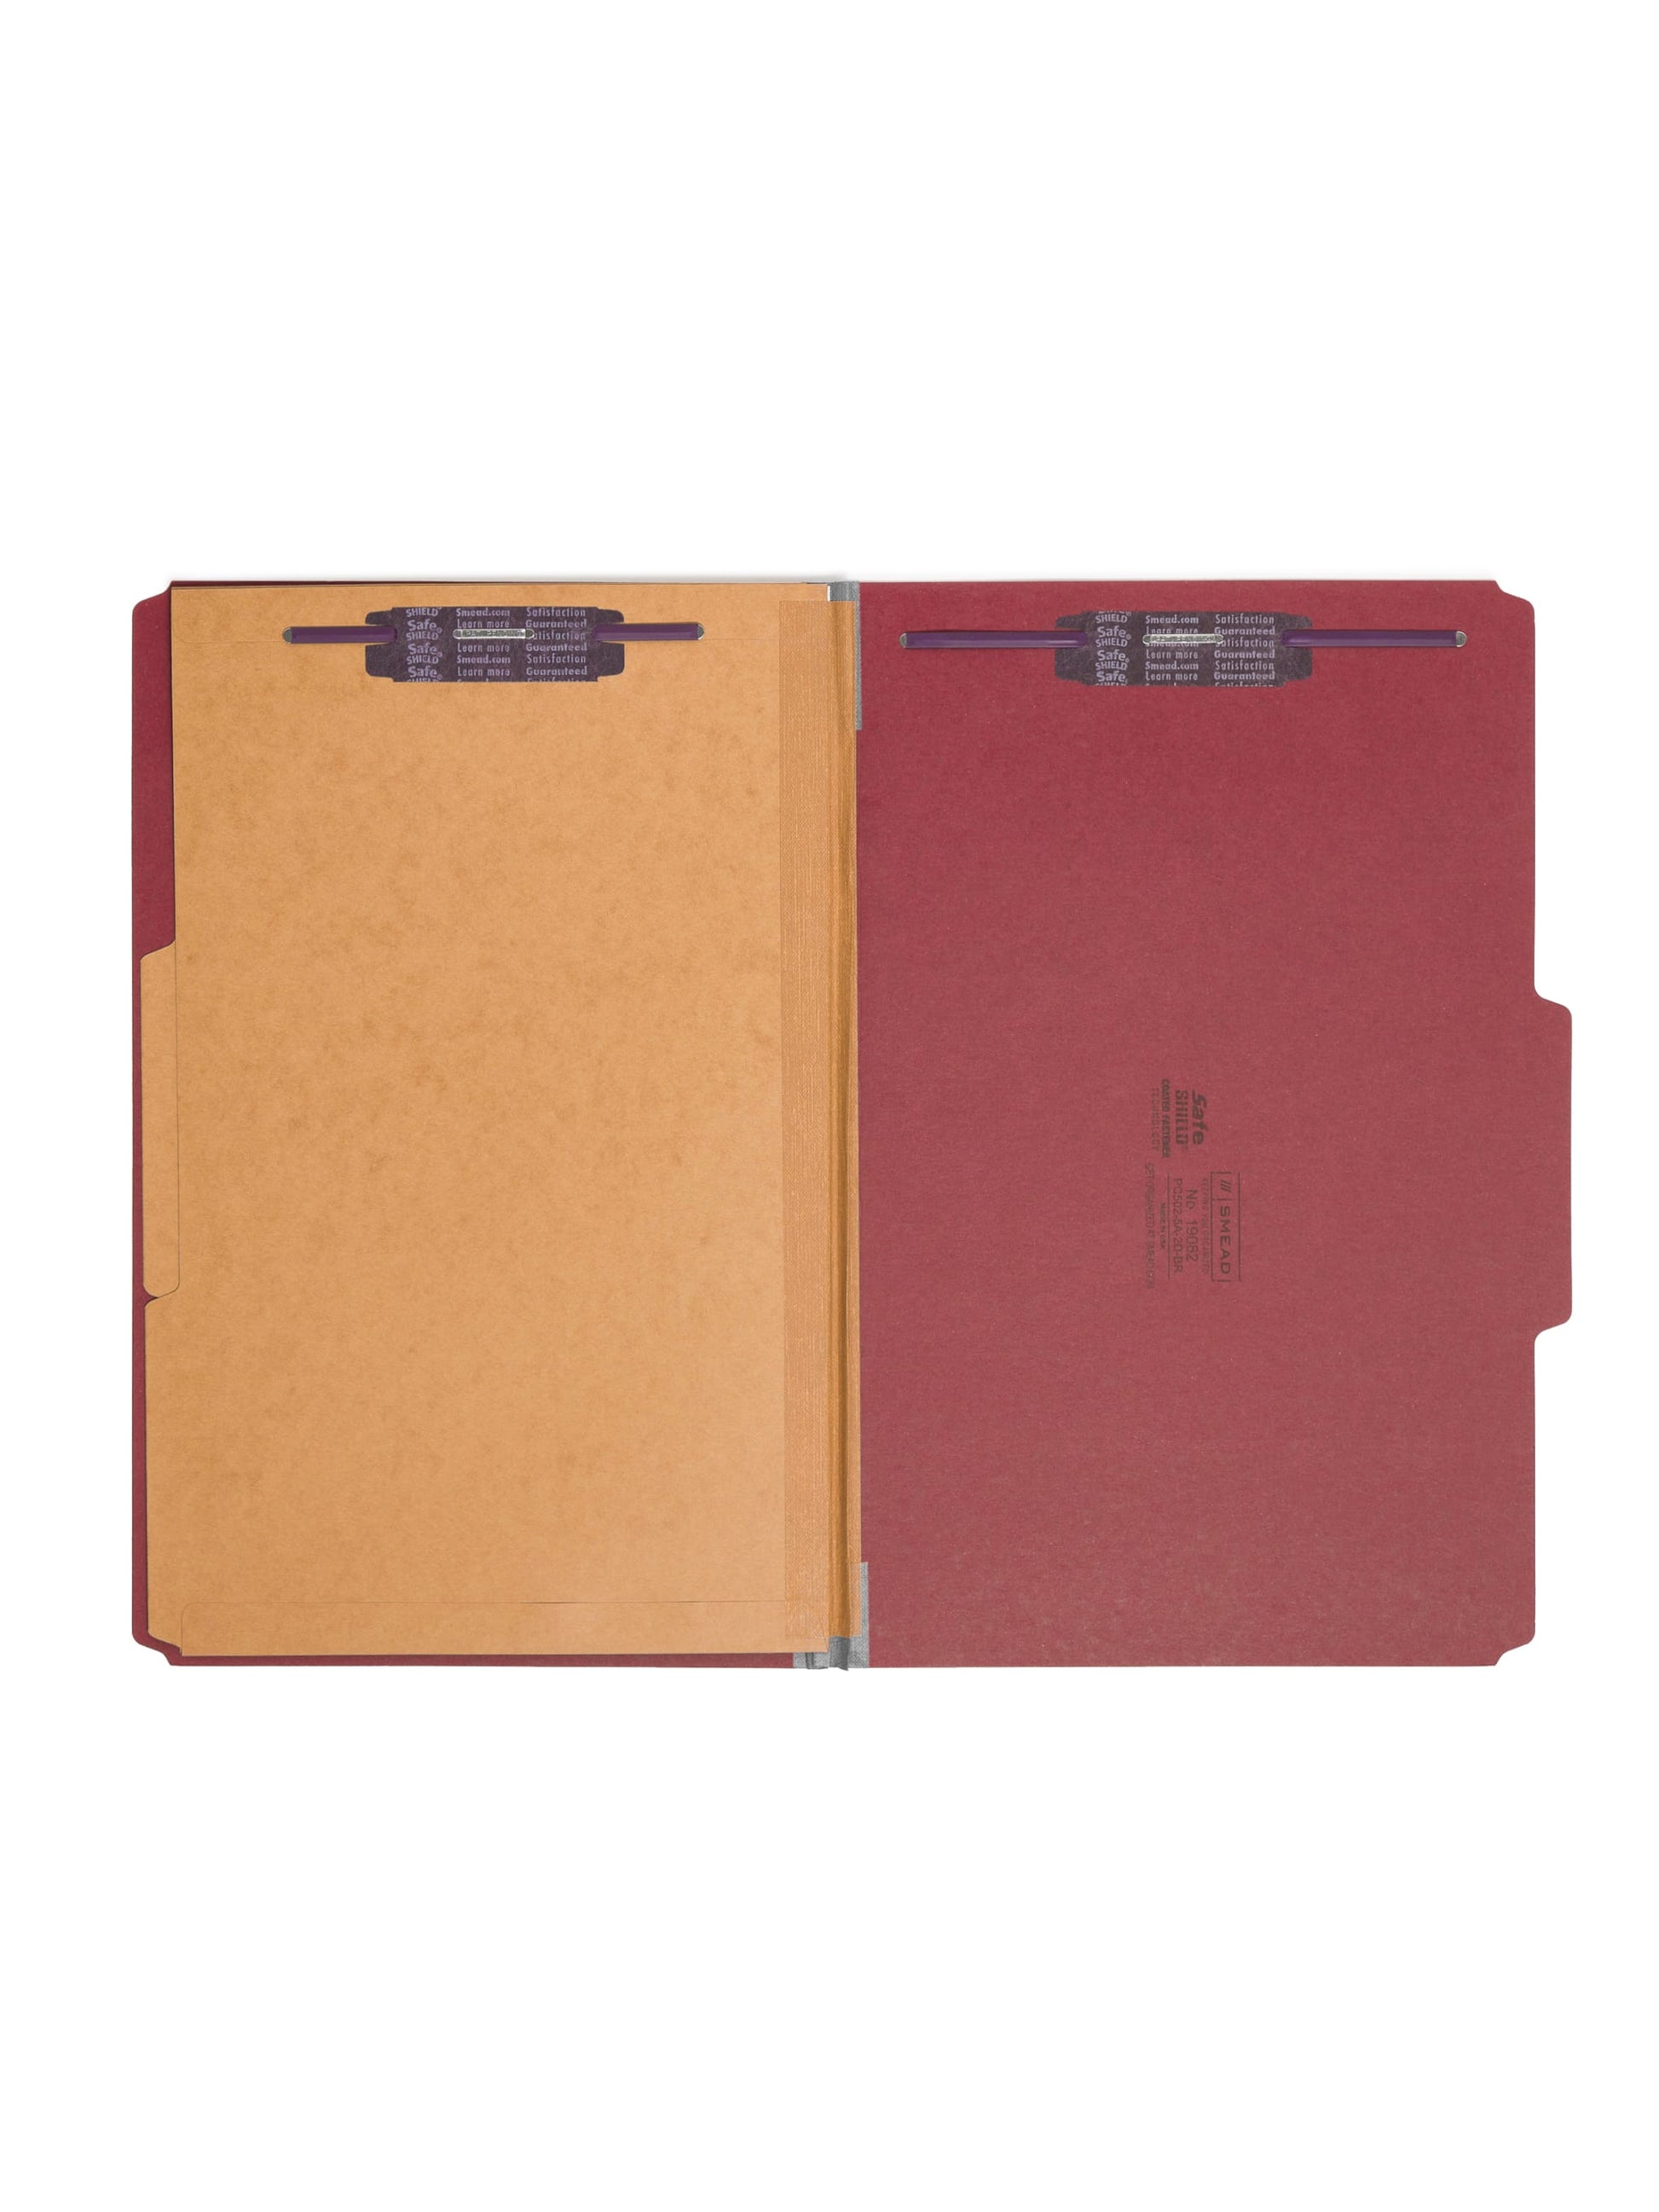 SafeSHIELD® Pressboard Classification File Folders with Pocket Dividers, Bright Red Color, Legal Size, Set of 0, 30086486190825